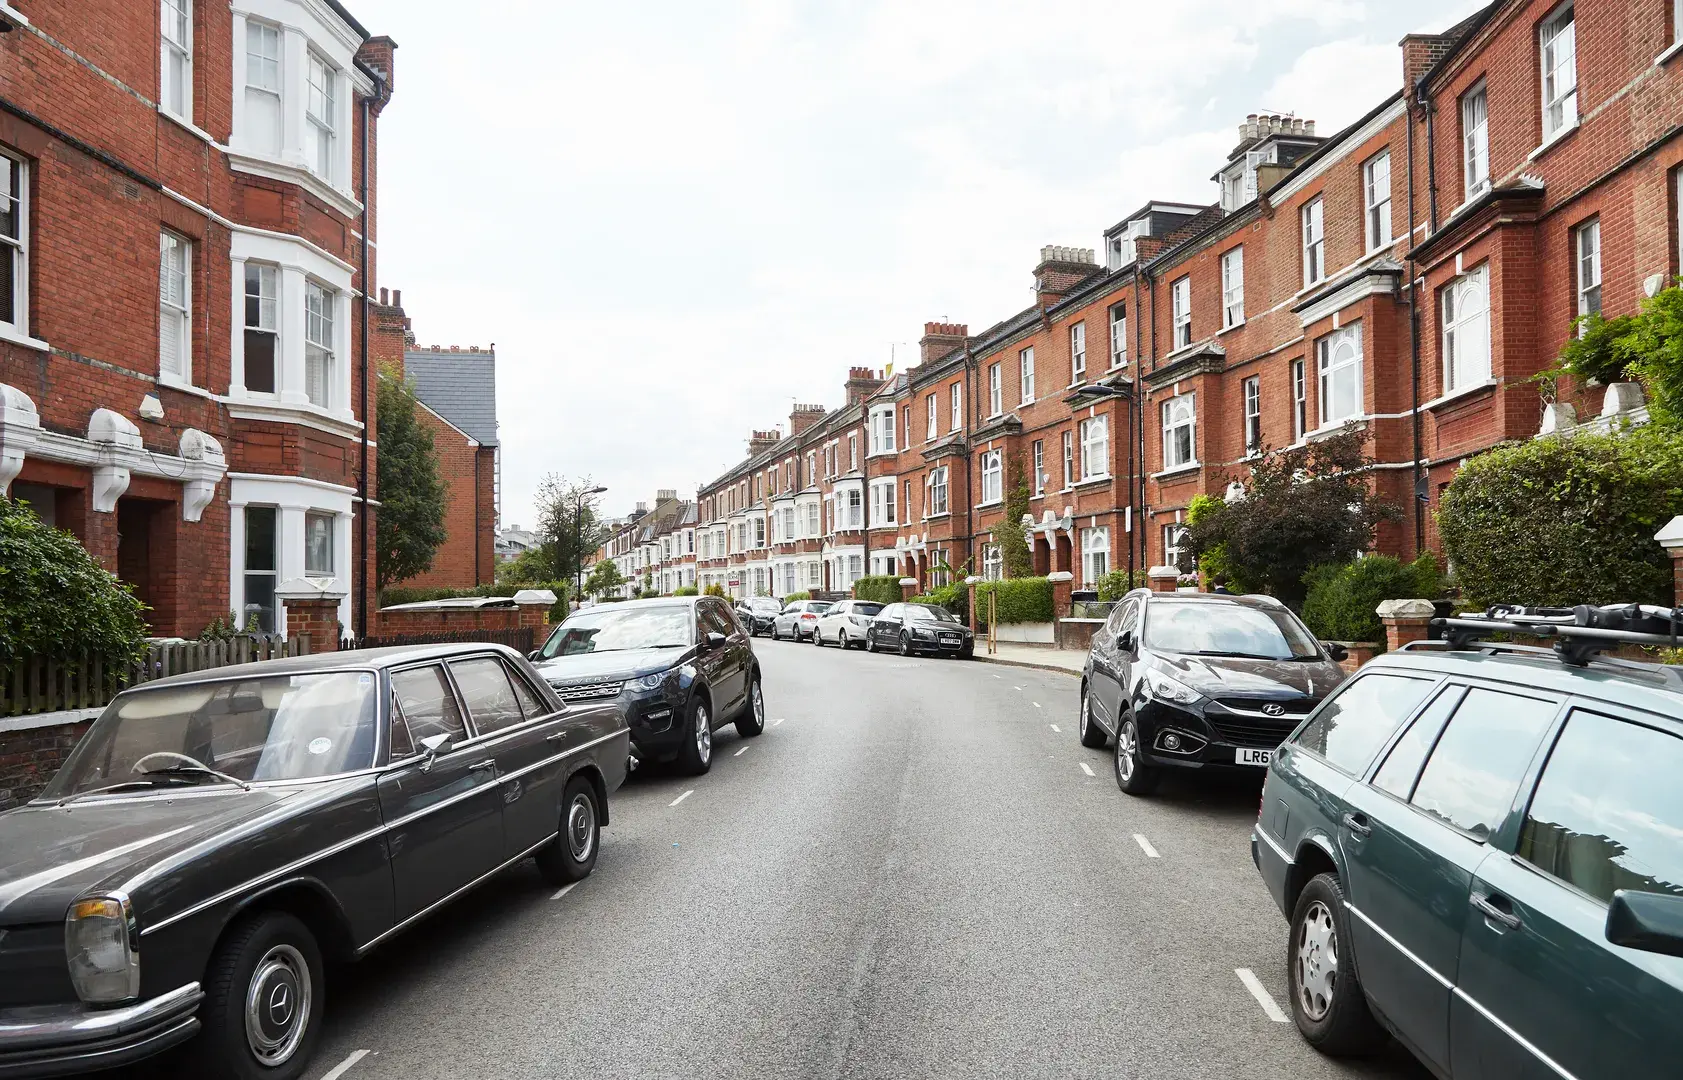 Constantine Road, holiday home in Hampstead, London